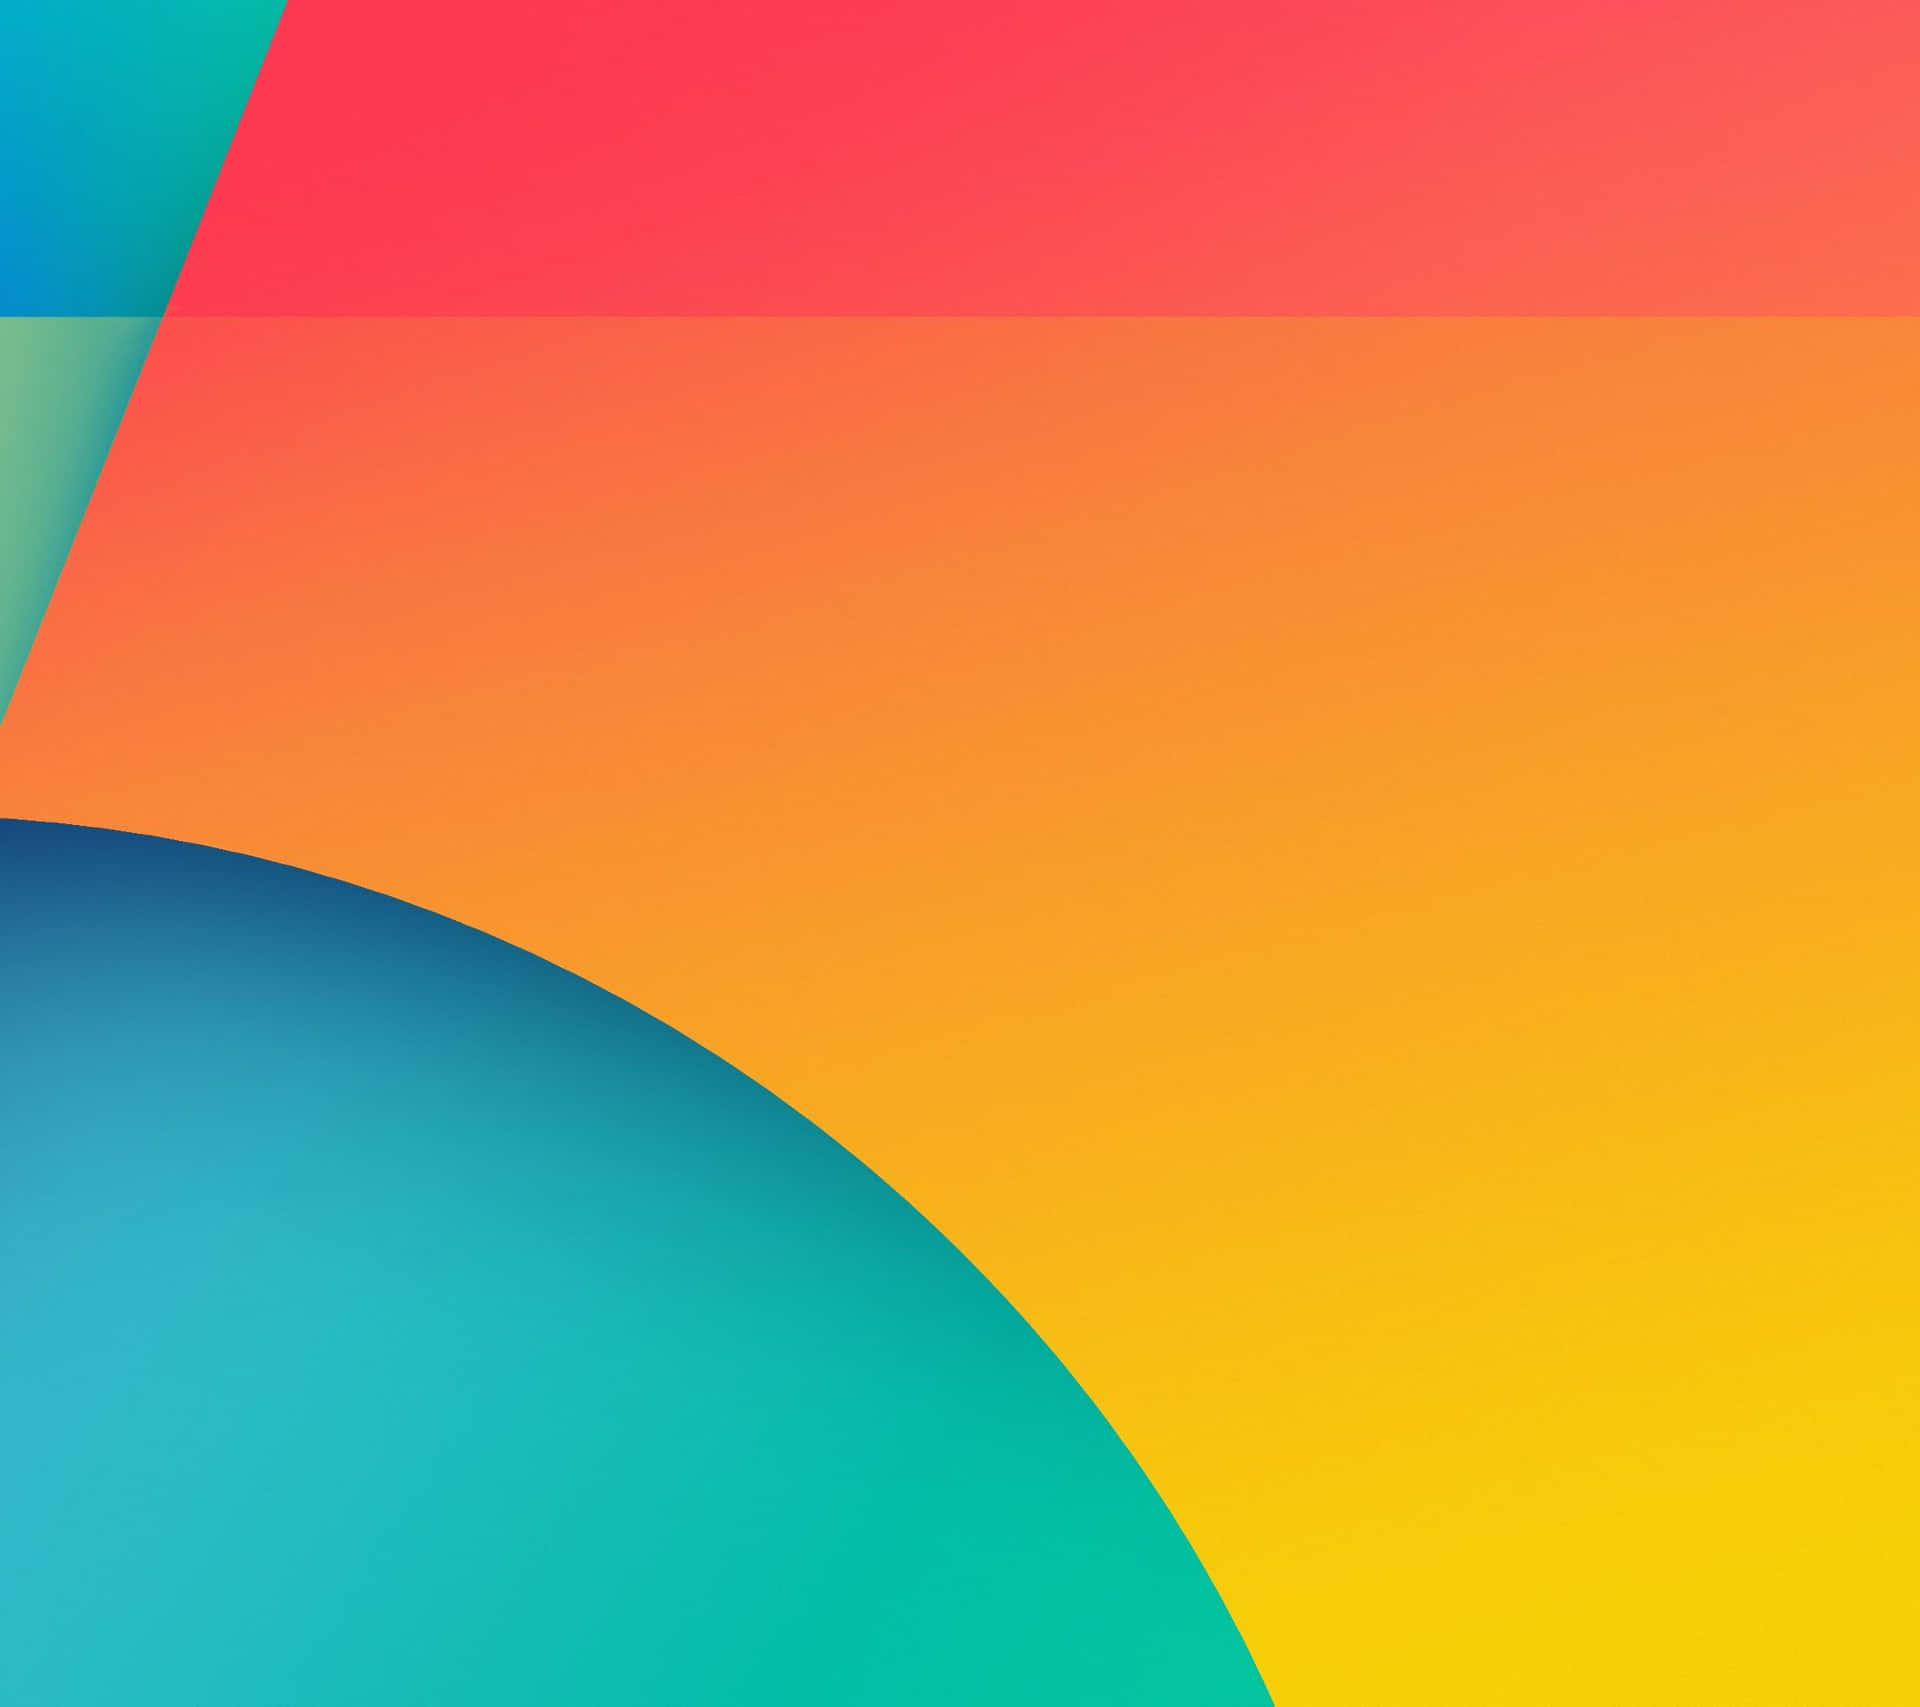 Get your new phone today - the powerful Nexus 5 Wallpaper